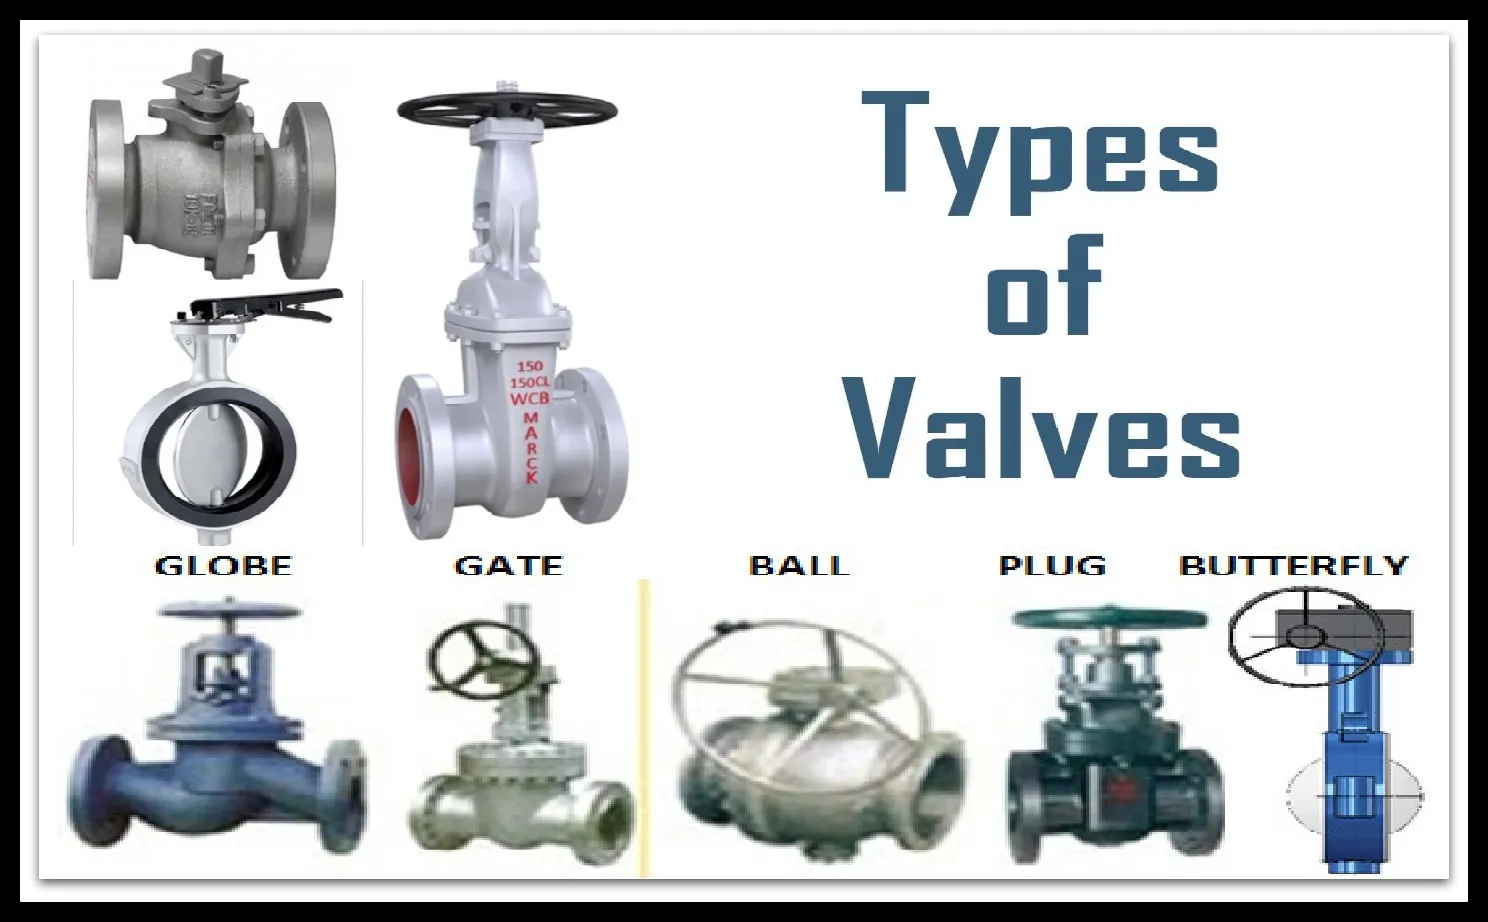 What are plumbing valve and plumbing valve types?